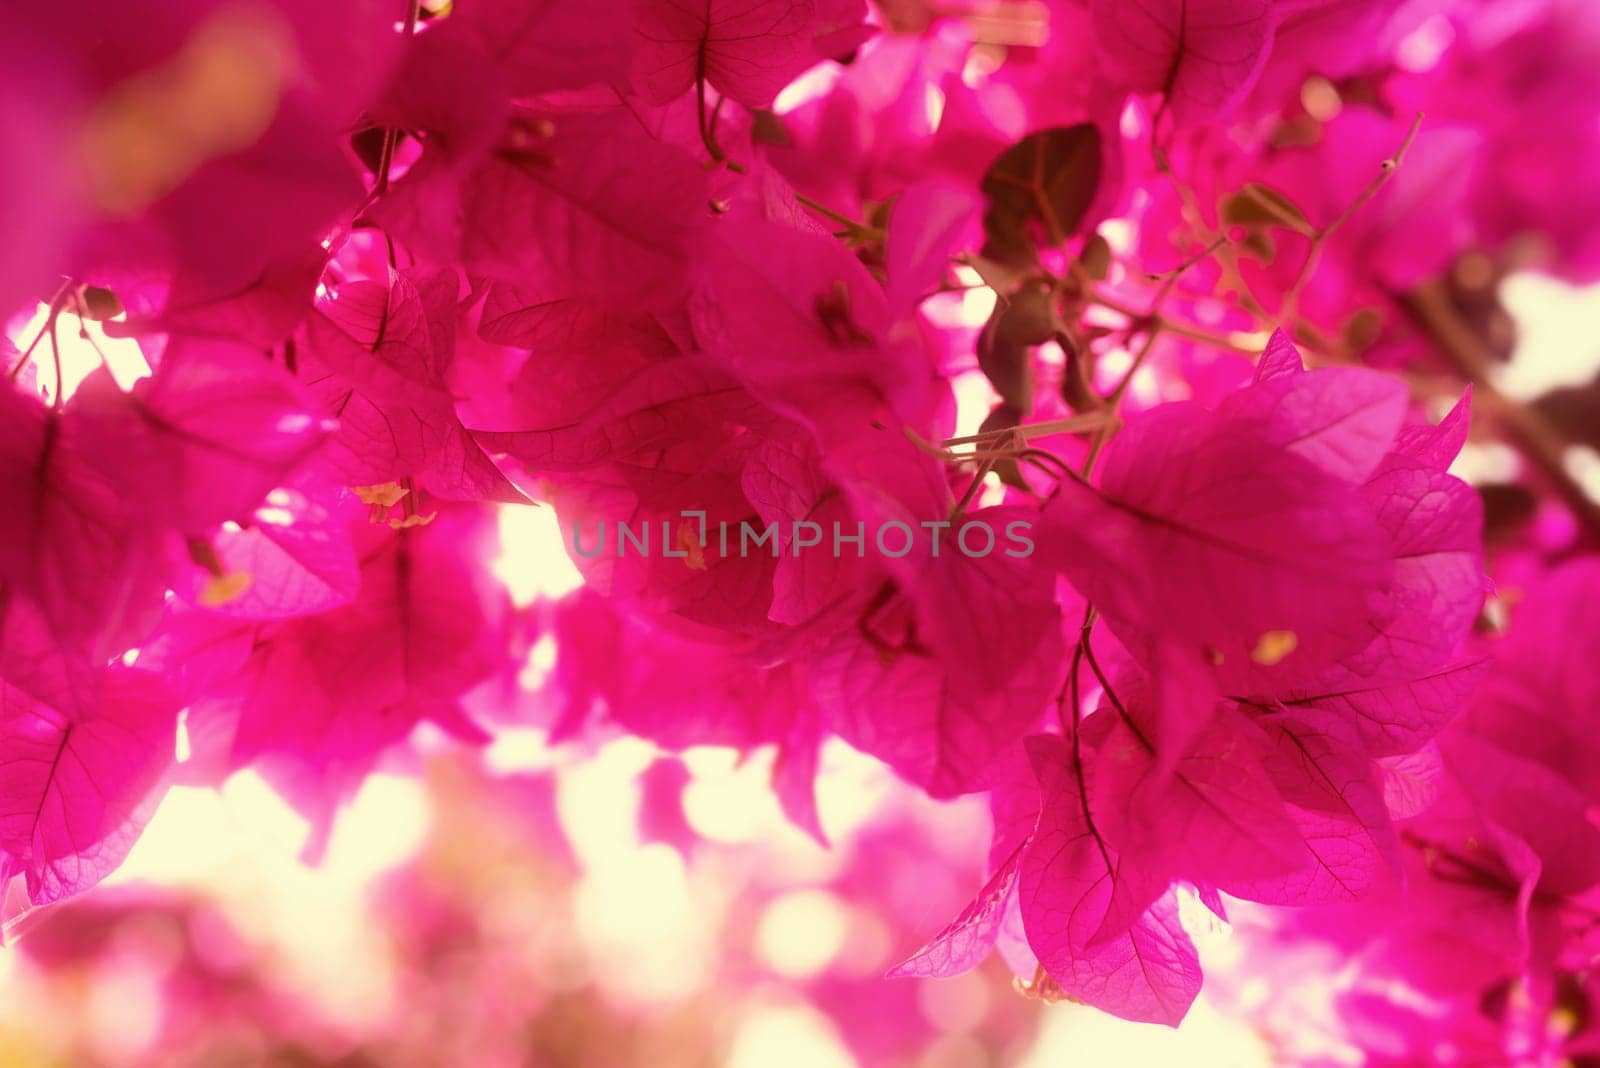 Bougainvillea flowers. Mostly blurred photo of a floral pink background